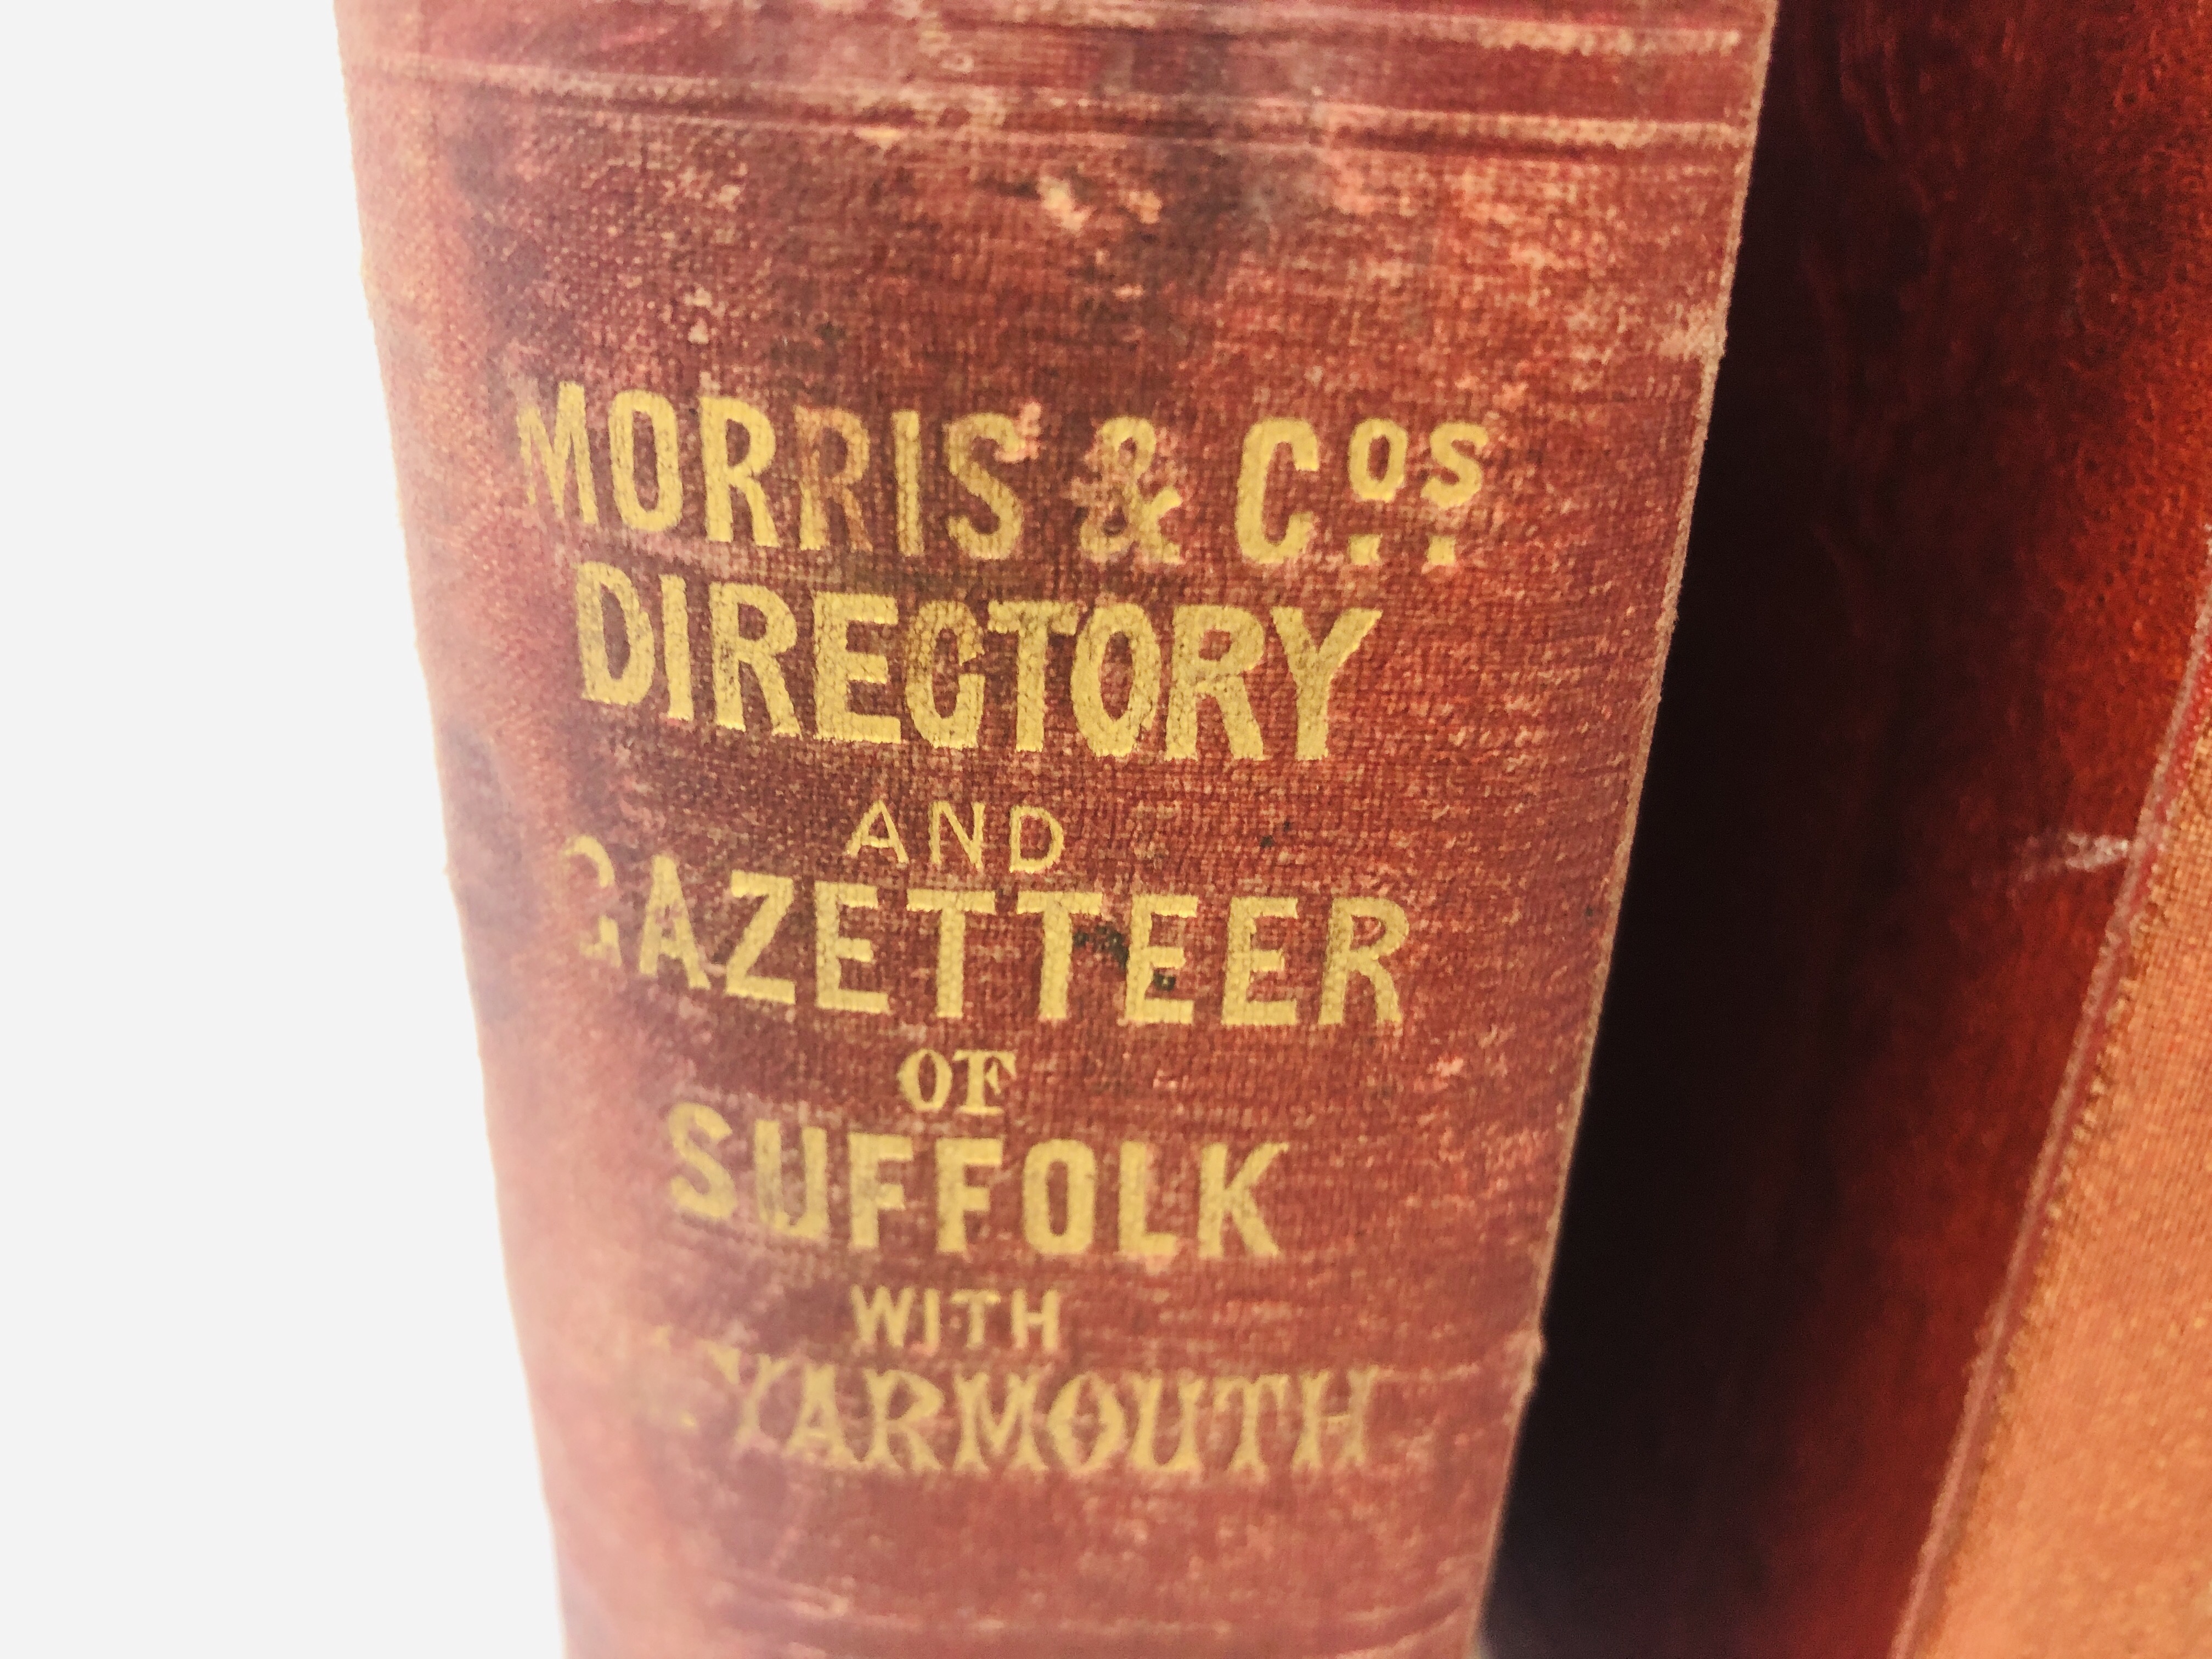 MORRIS & CO. DIRECTORY & GAZETEER OF SUFFOLK WITH GREAT YARMOUTH PUB. NOTTINGHAM 1868. - Image 4 of 6